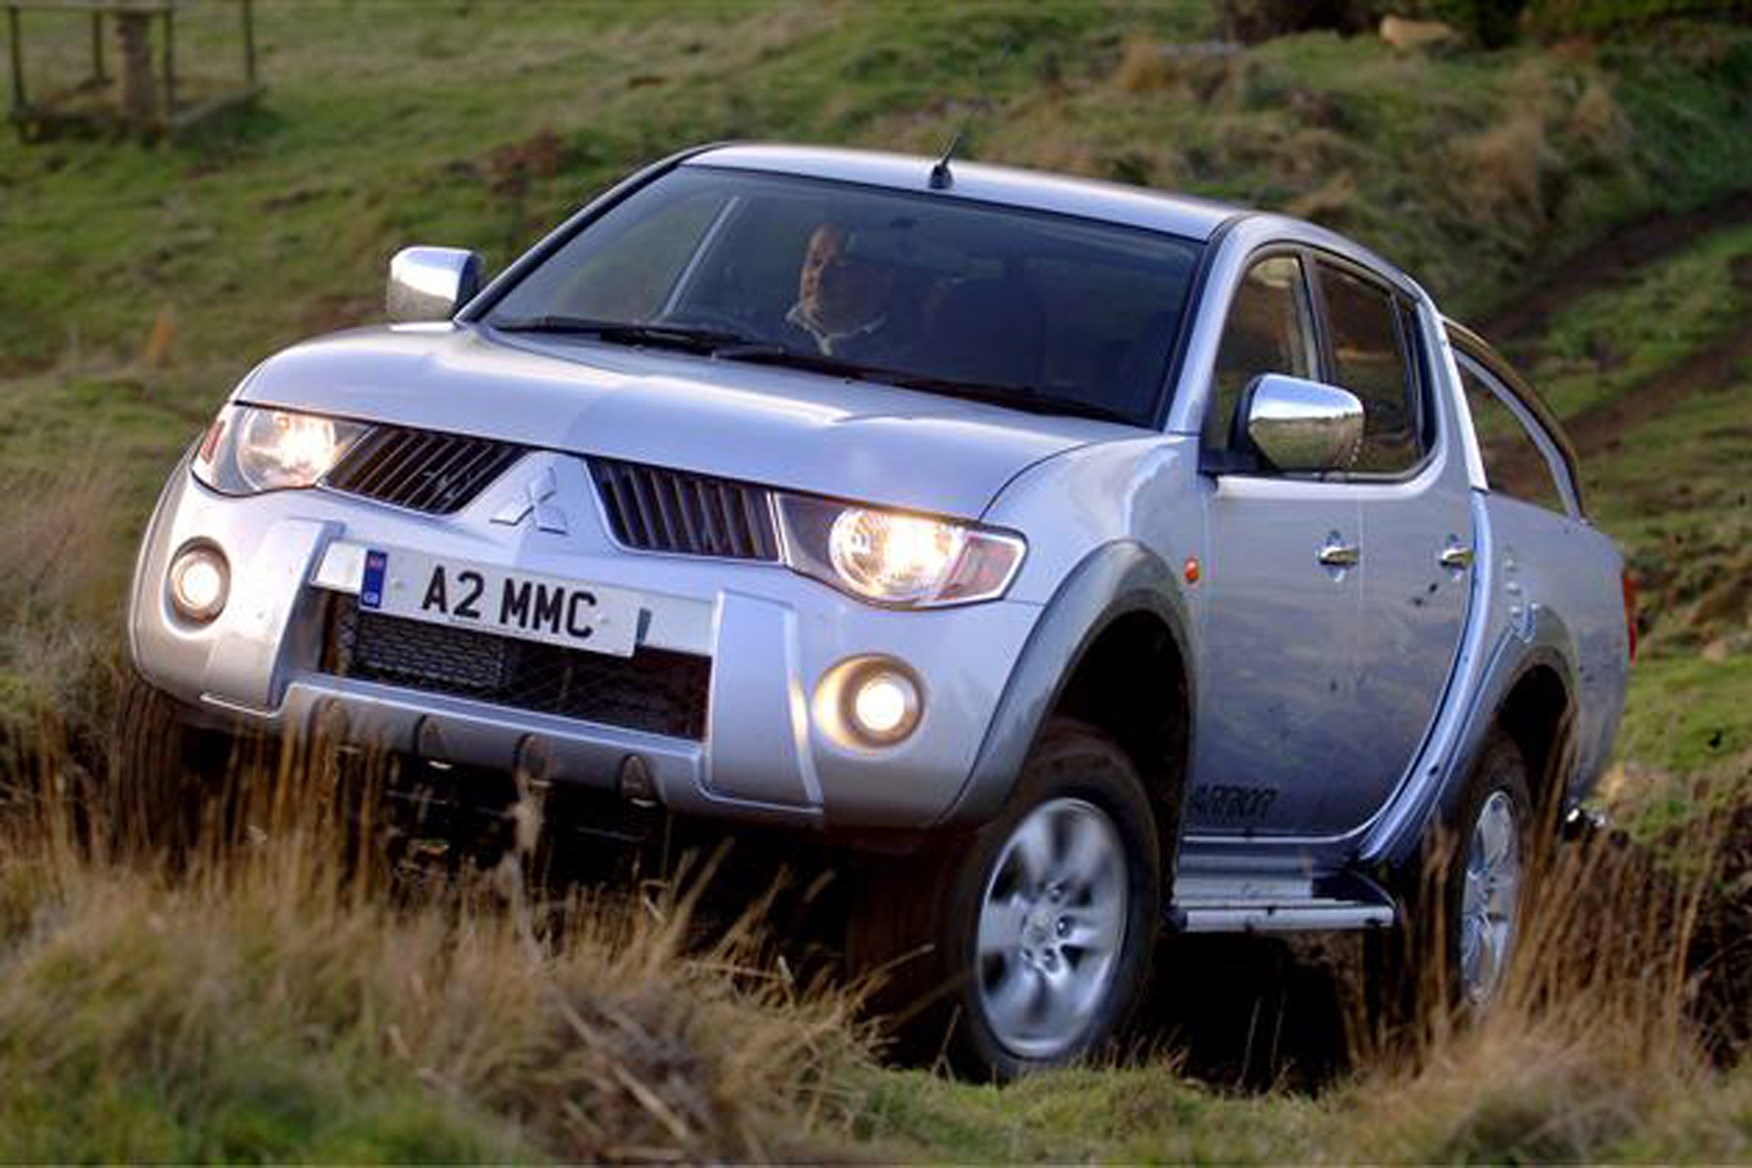 Mitsubishi L200 2006-2015 review on Parkers Vans - off road capabilities